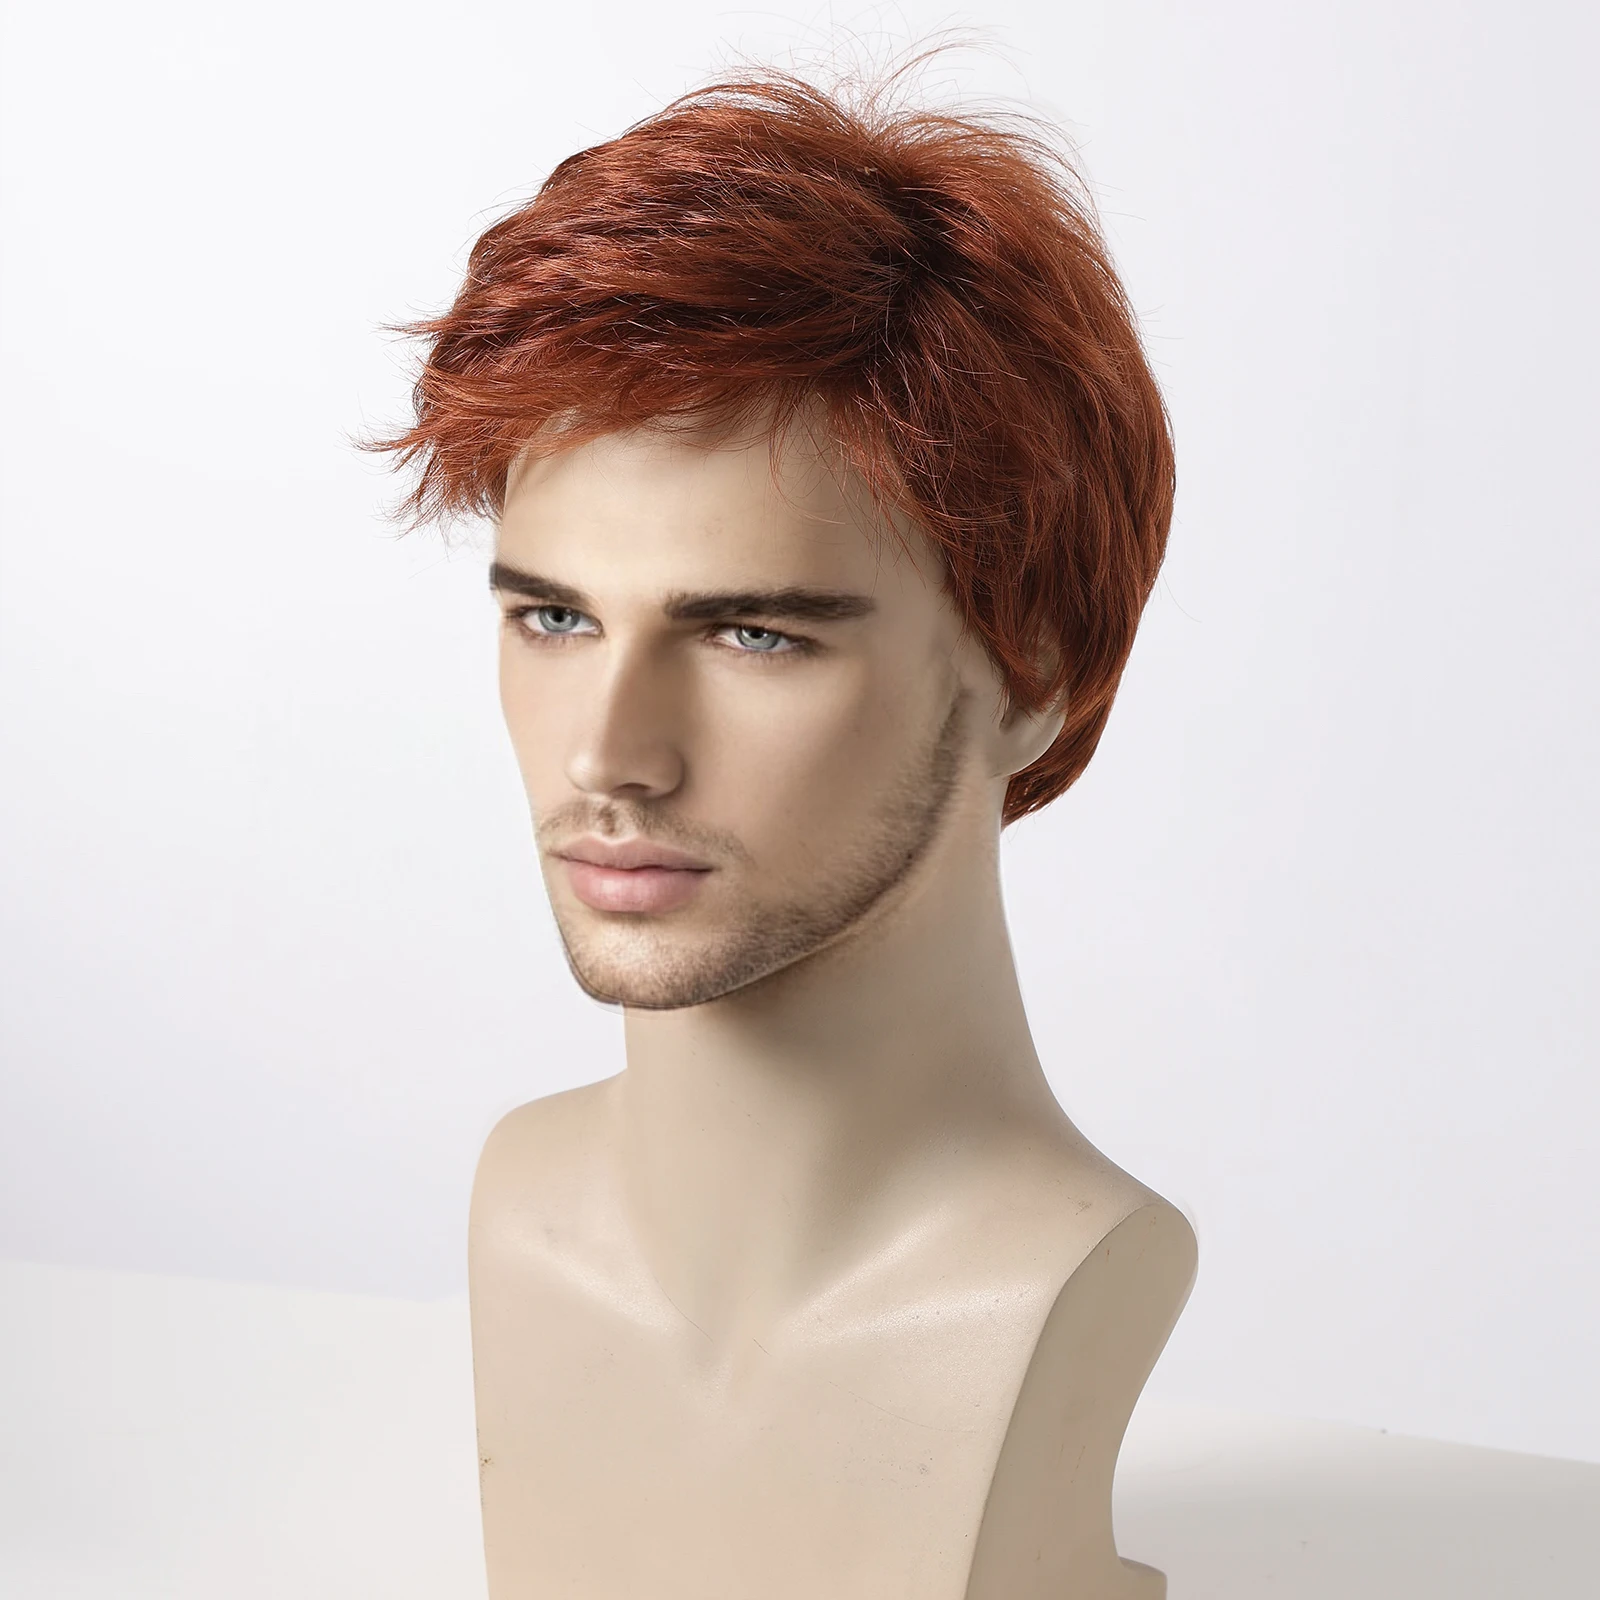 ALAN EATON Short Copper Red Wigs for Men Synthetic Fluffy Natural Wig Heat Resistant Halloween Cosplay Wig Auburn Pixie Cut Wig